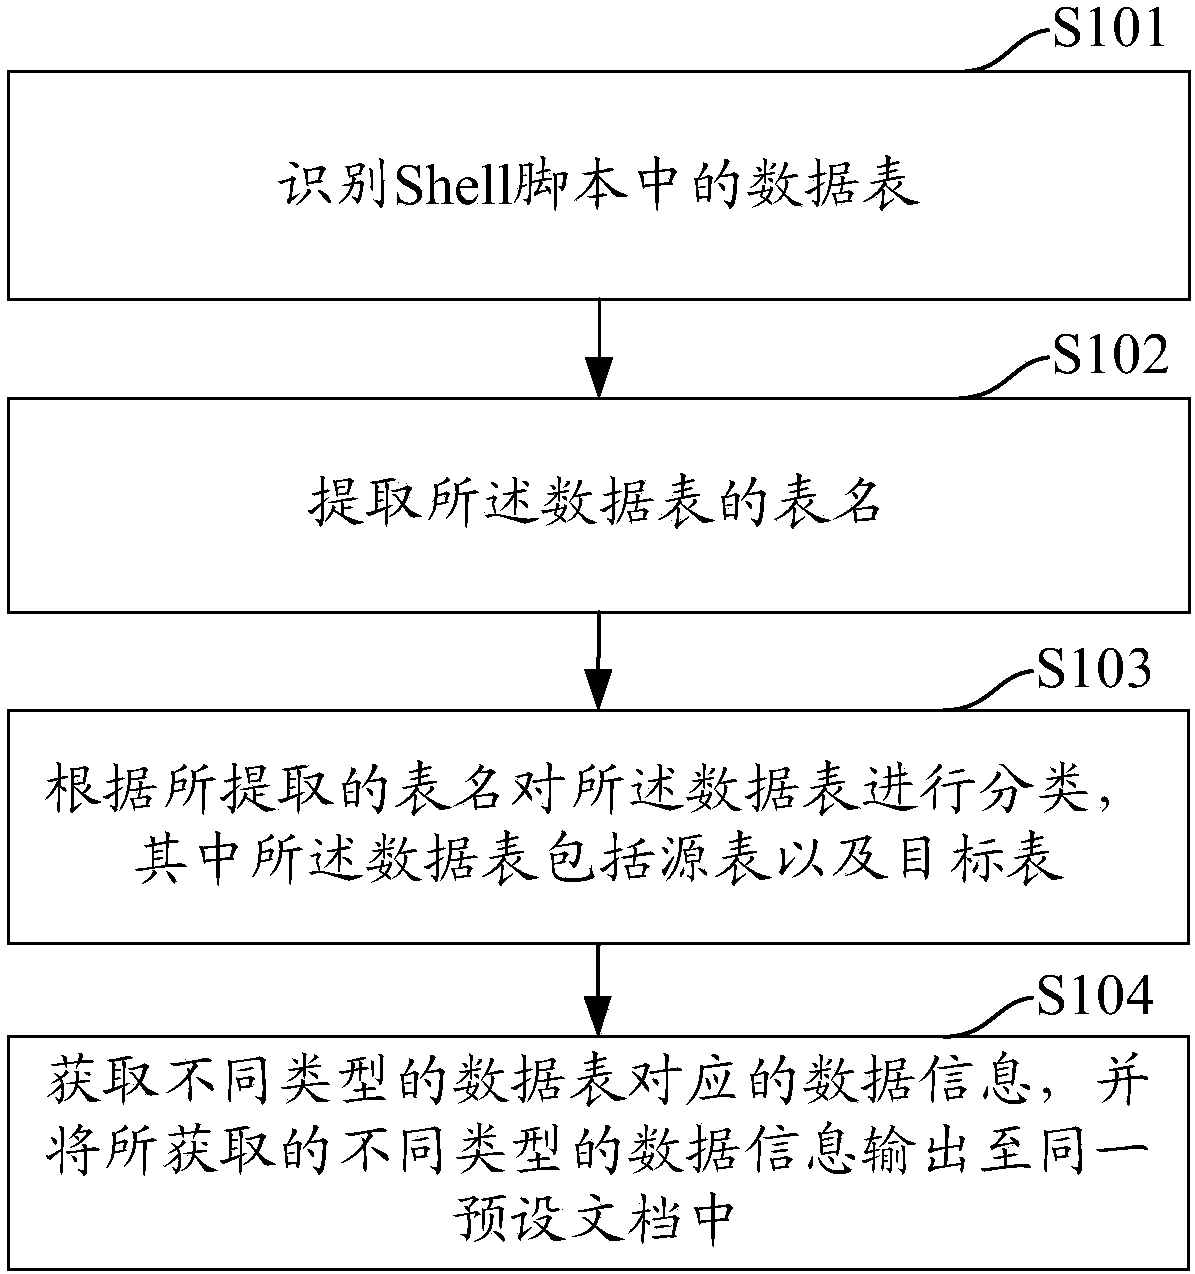 Data table extraction method based on Shell, terminal, equipment and storage medium